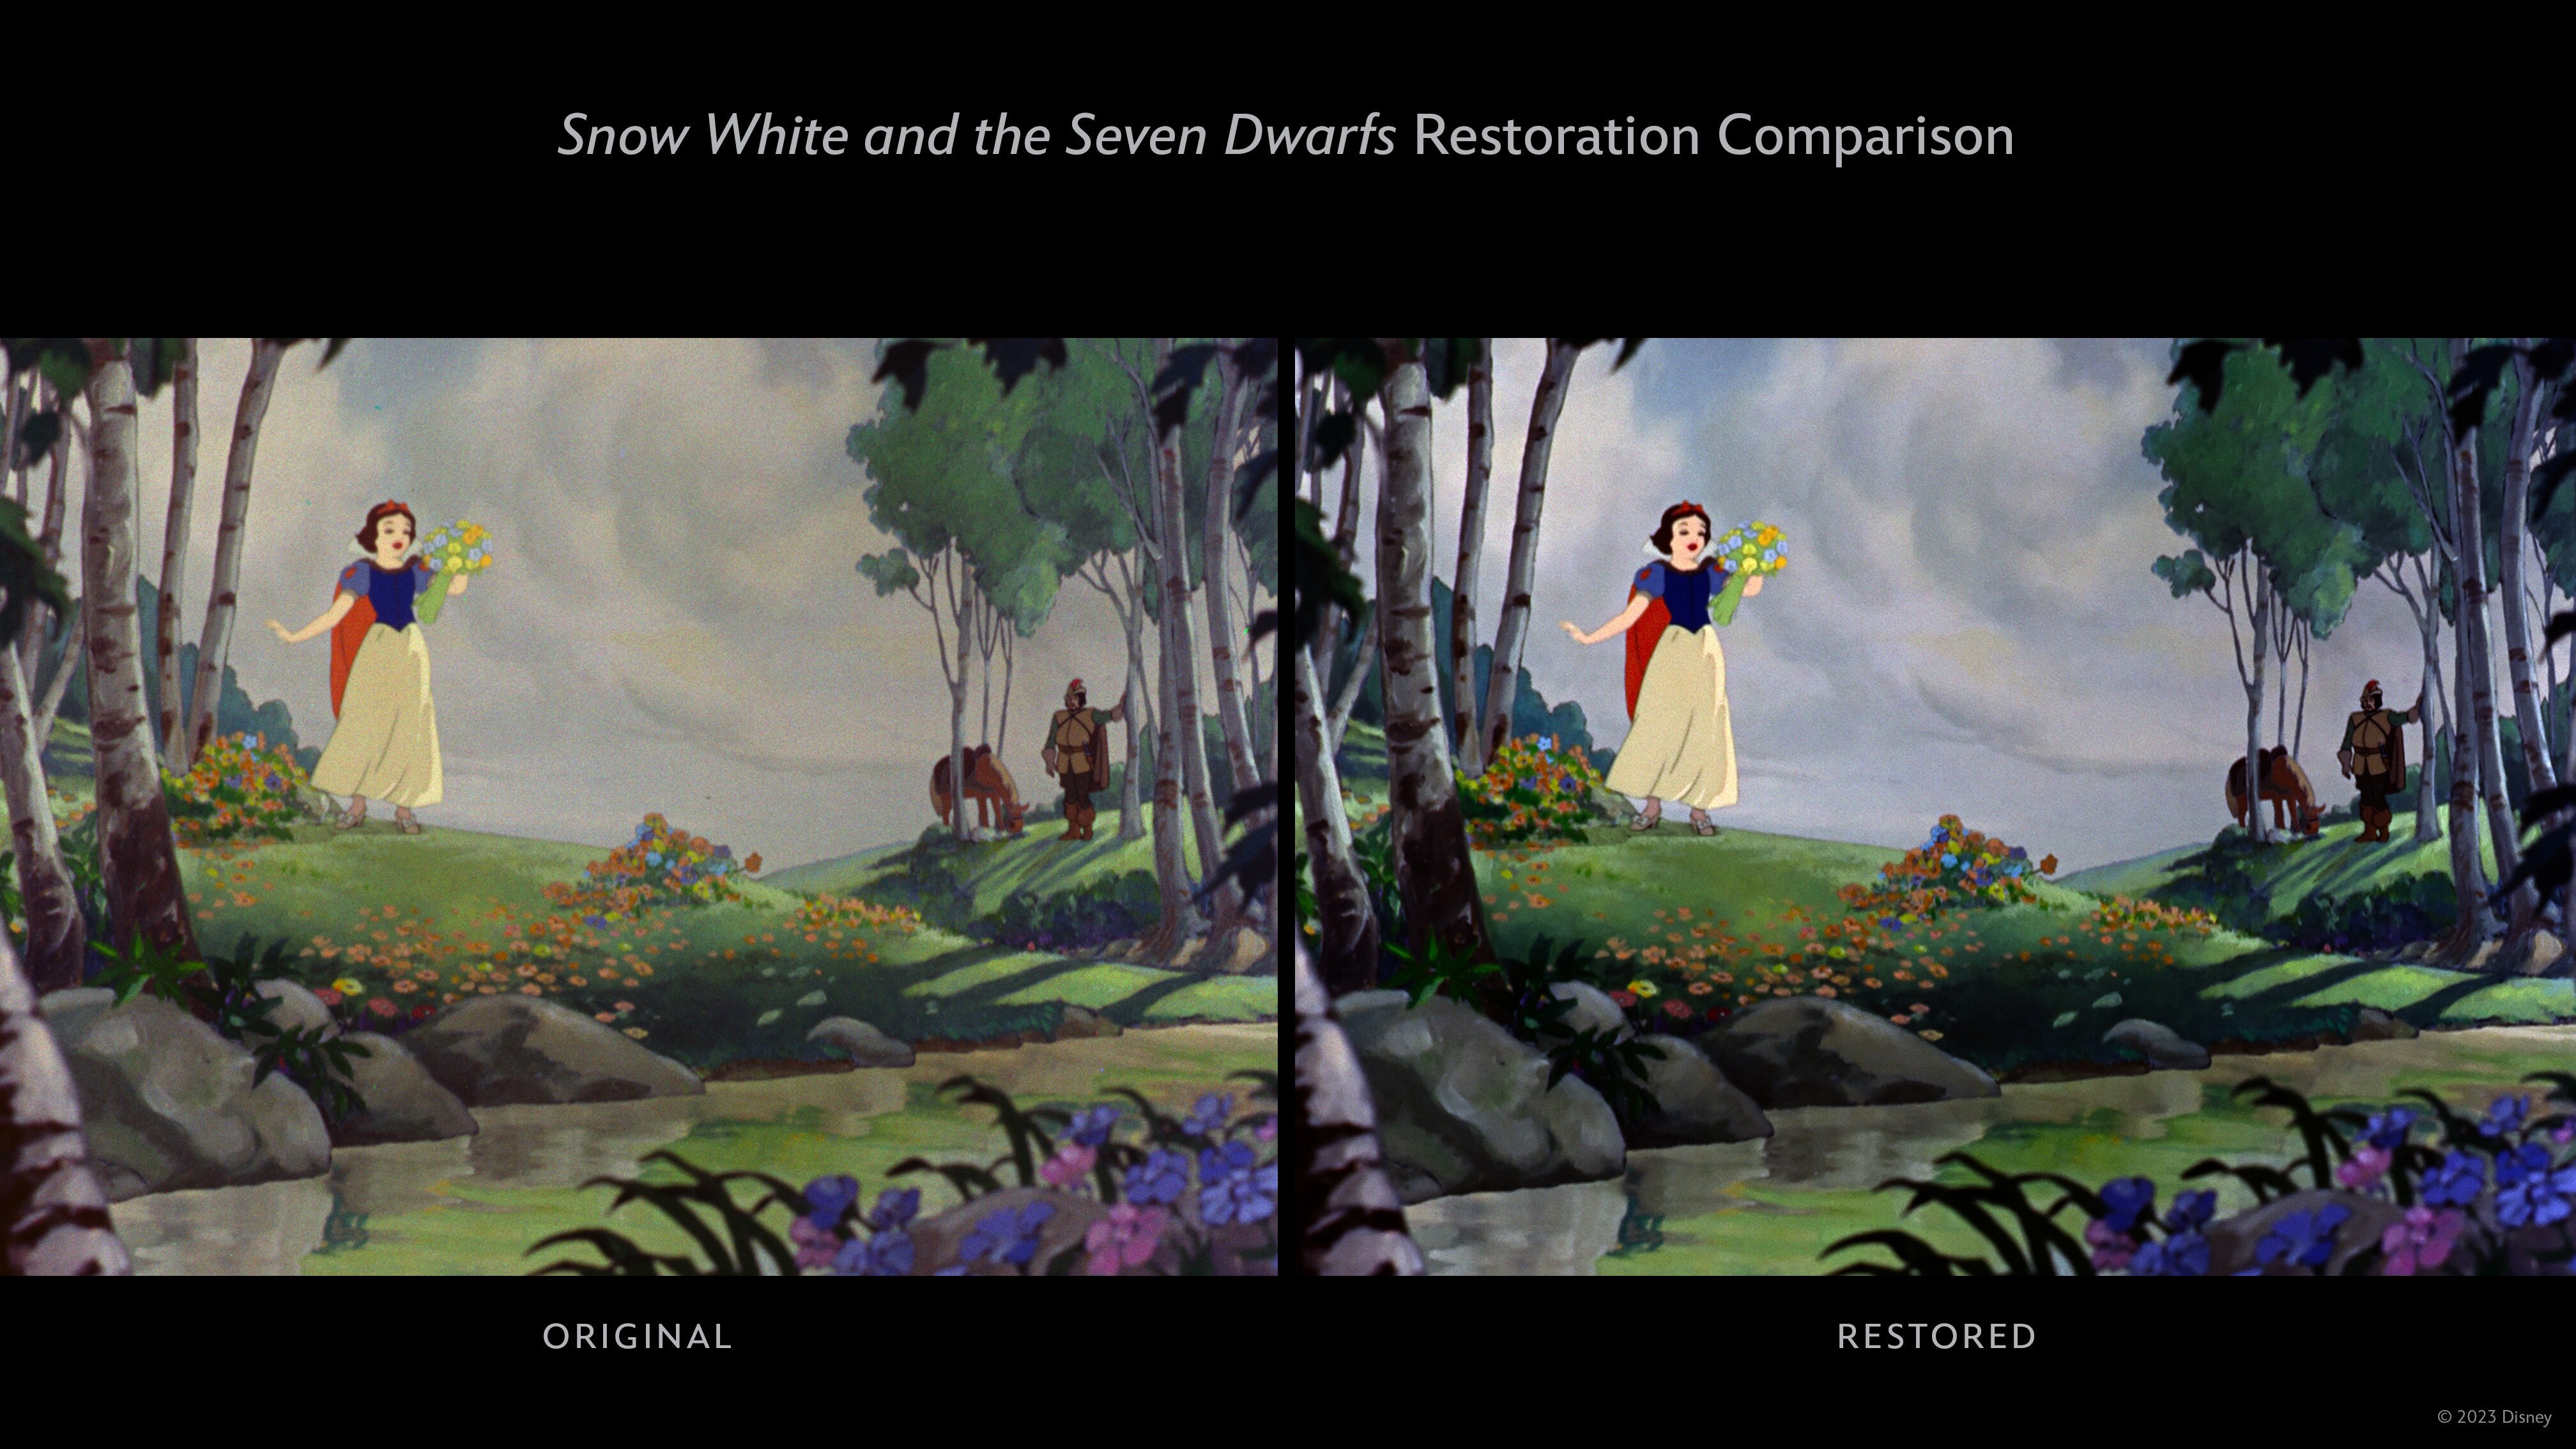 The Animated Classic "Snow White And The Seven Dwarfs" Comes To Disney+ In An All-New, Stunning 4K Restoration